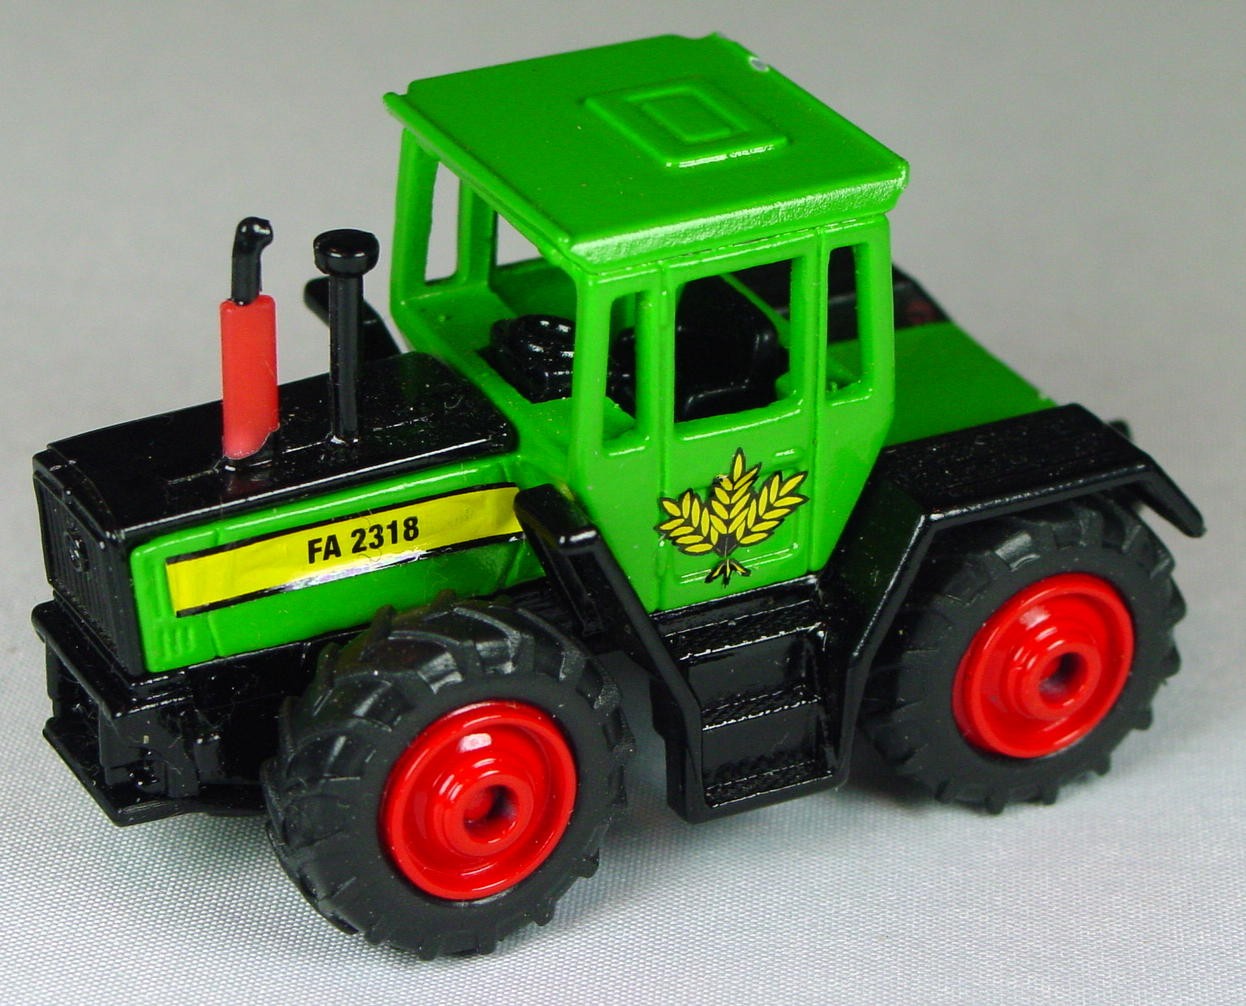 Pre-production 73 E 7 - Mercedes Tractor Green RED PAINTED WHLS GRN ROOF